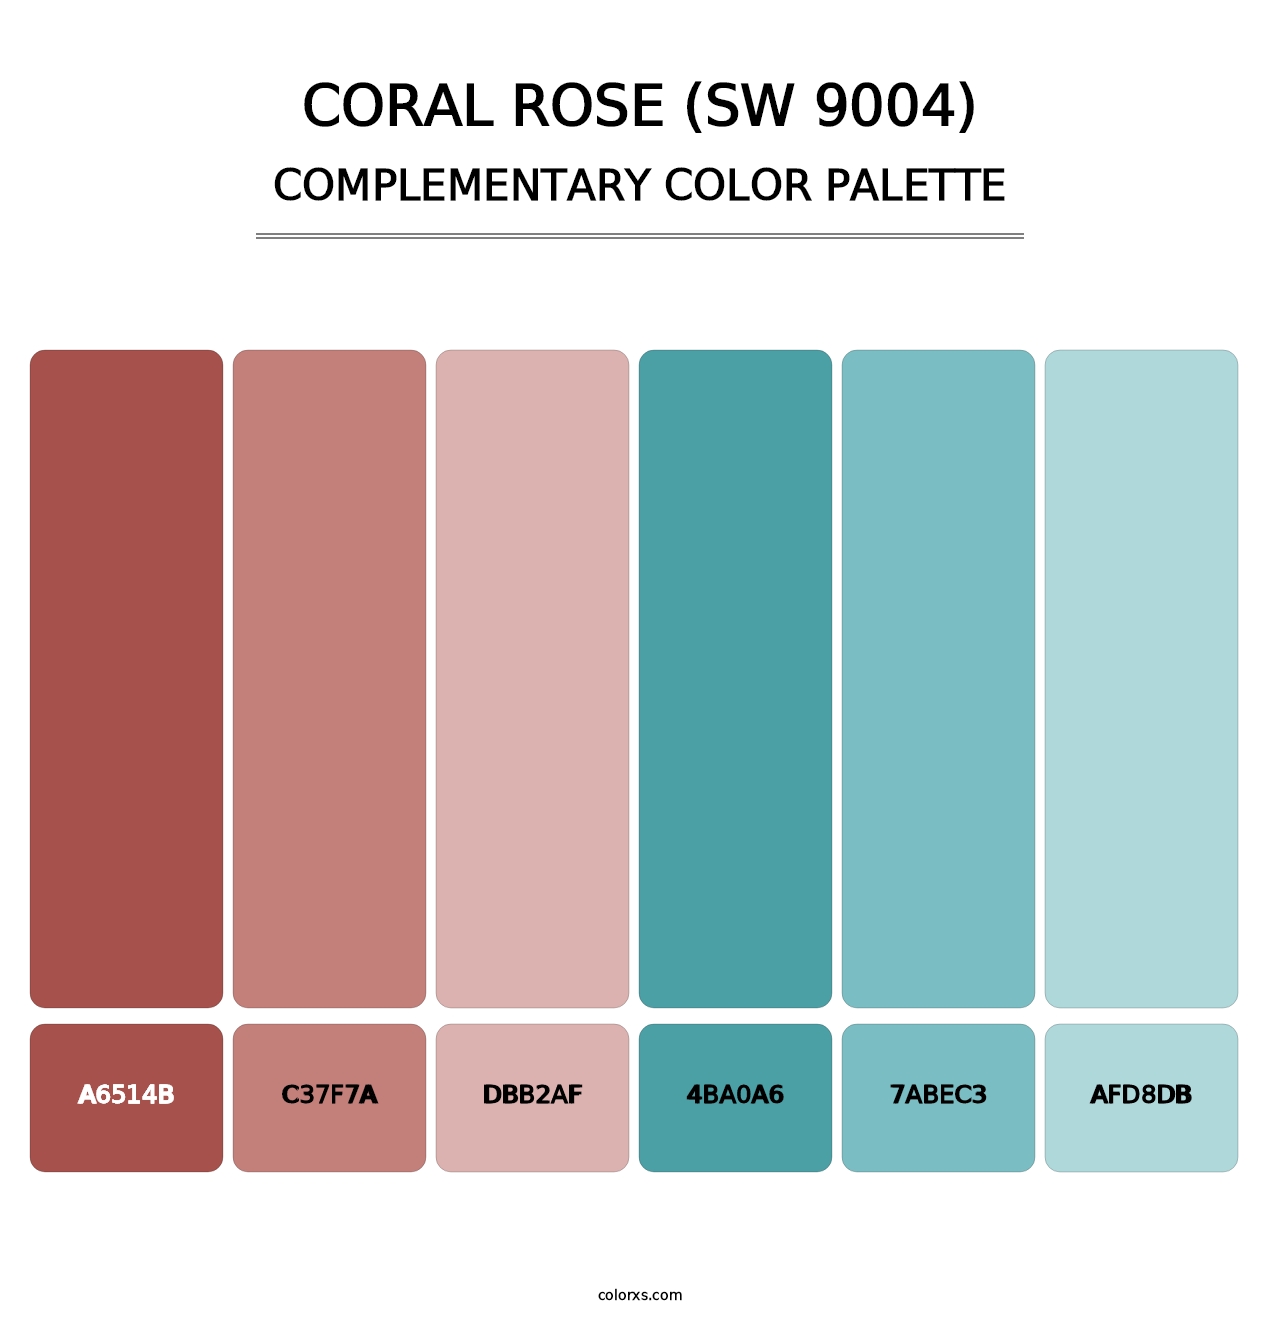 Coral Rose (SW 9004) - Complementary Color Palette